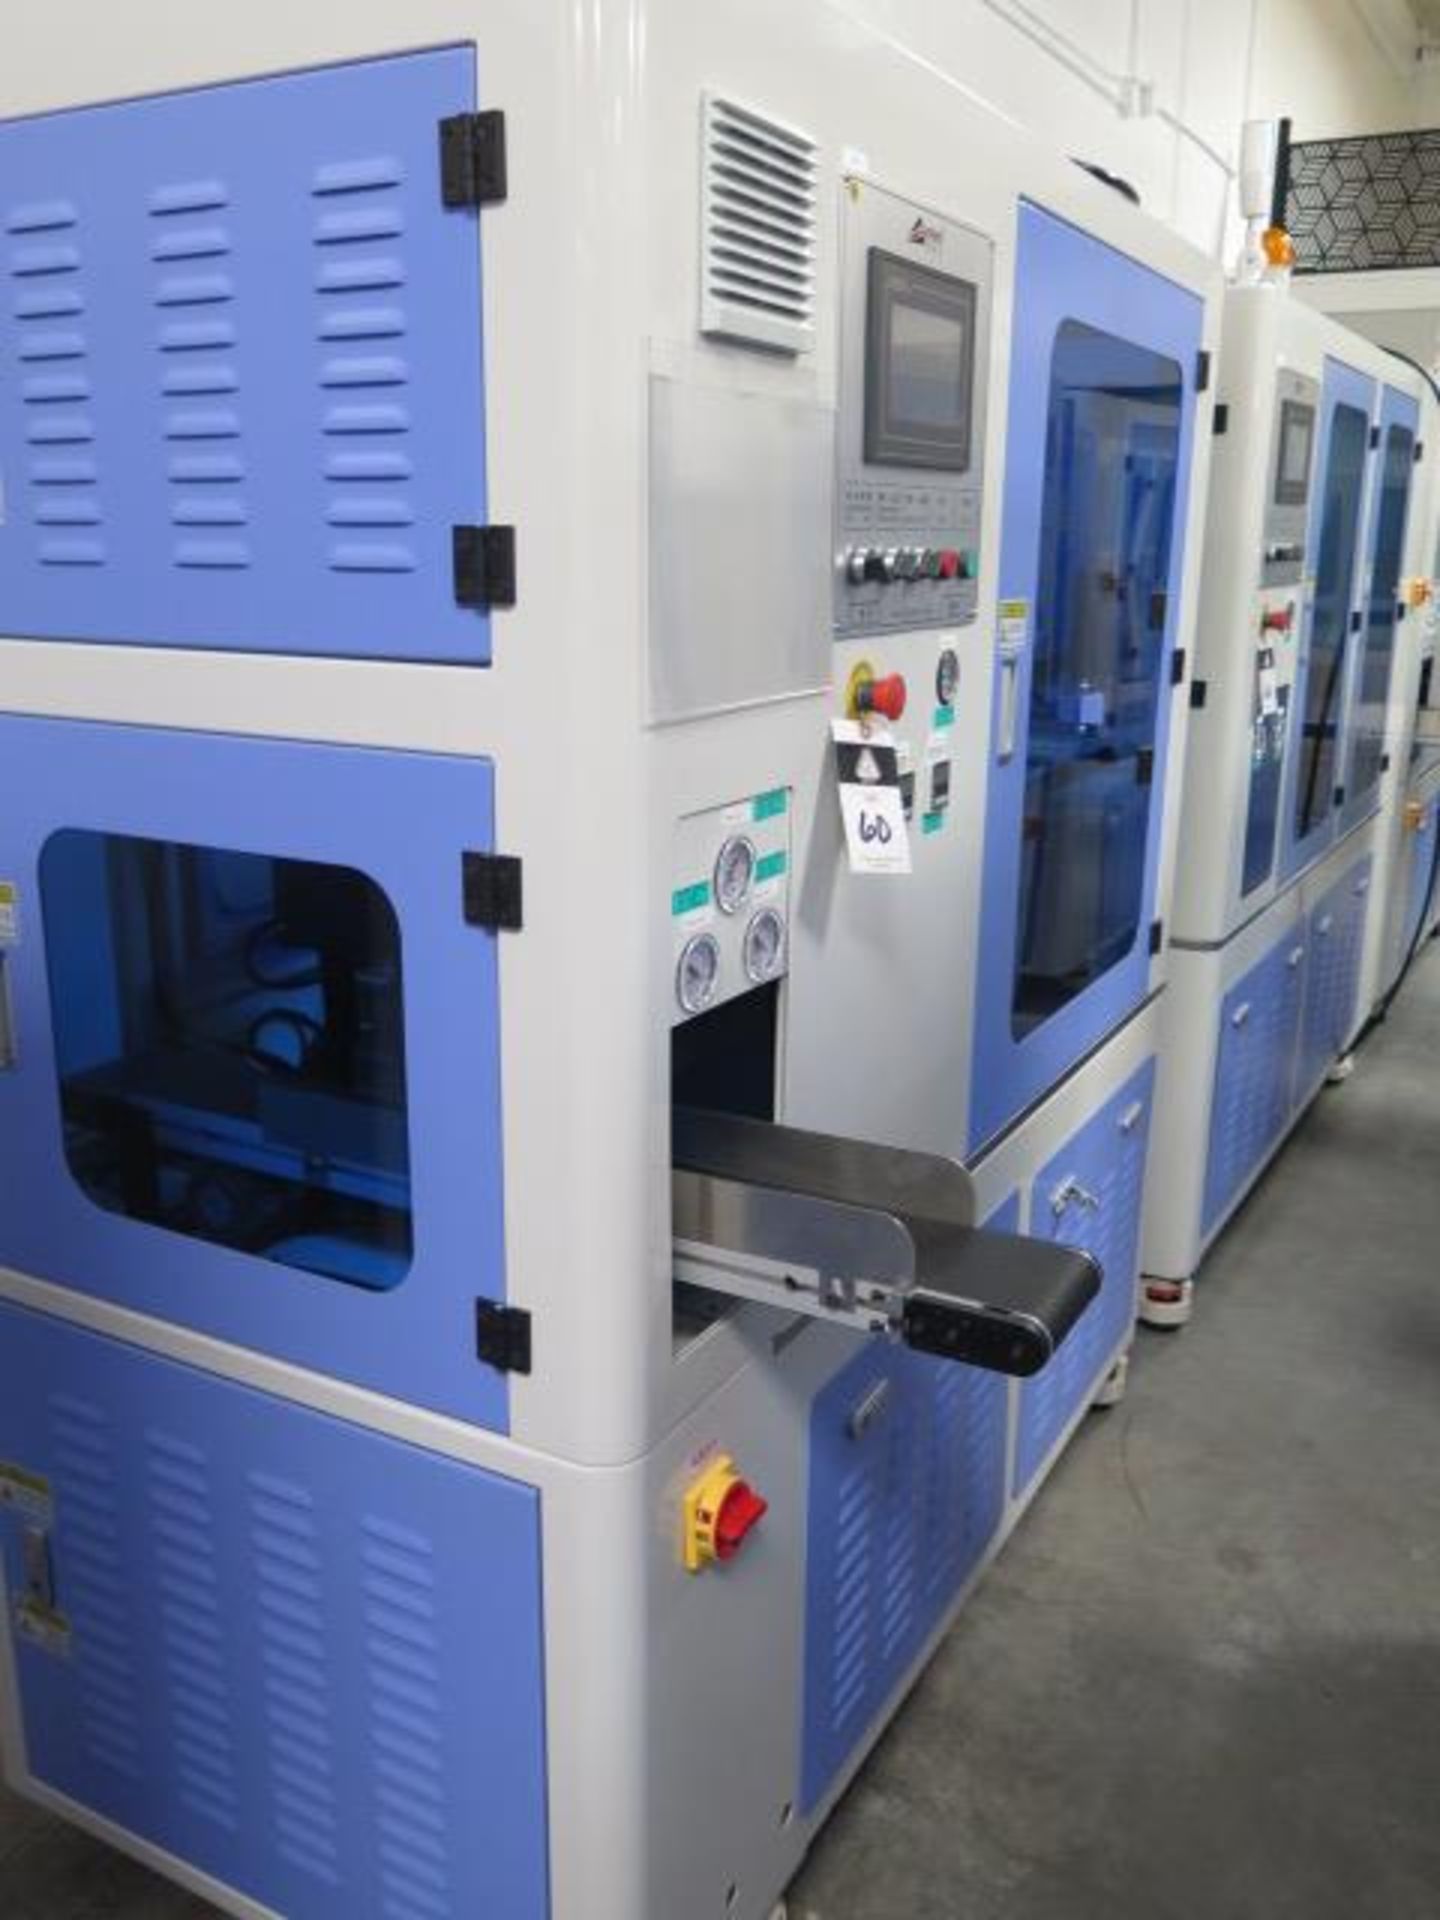 2/2021 Gereke mdl. GRK-TWO1 Cassette Assembly and Packaging Line s/n GRK20210225090 , SOLD AS IS